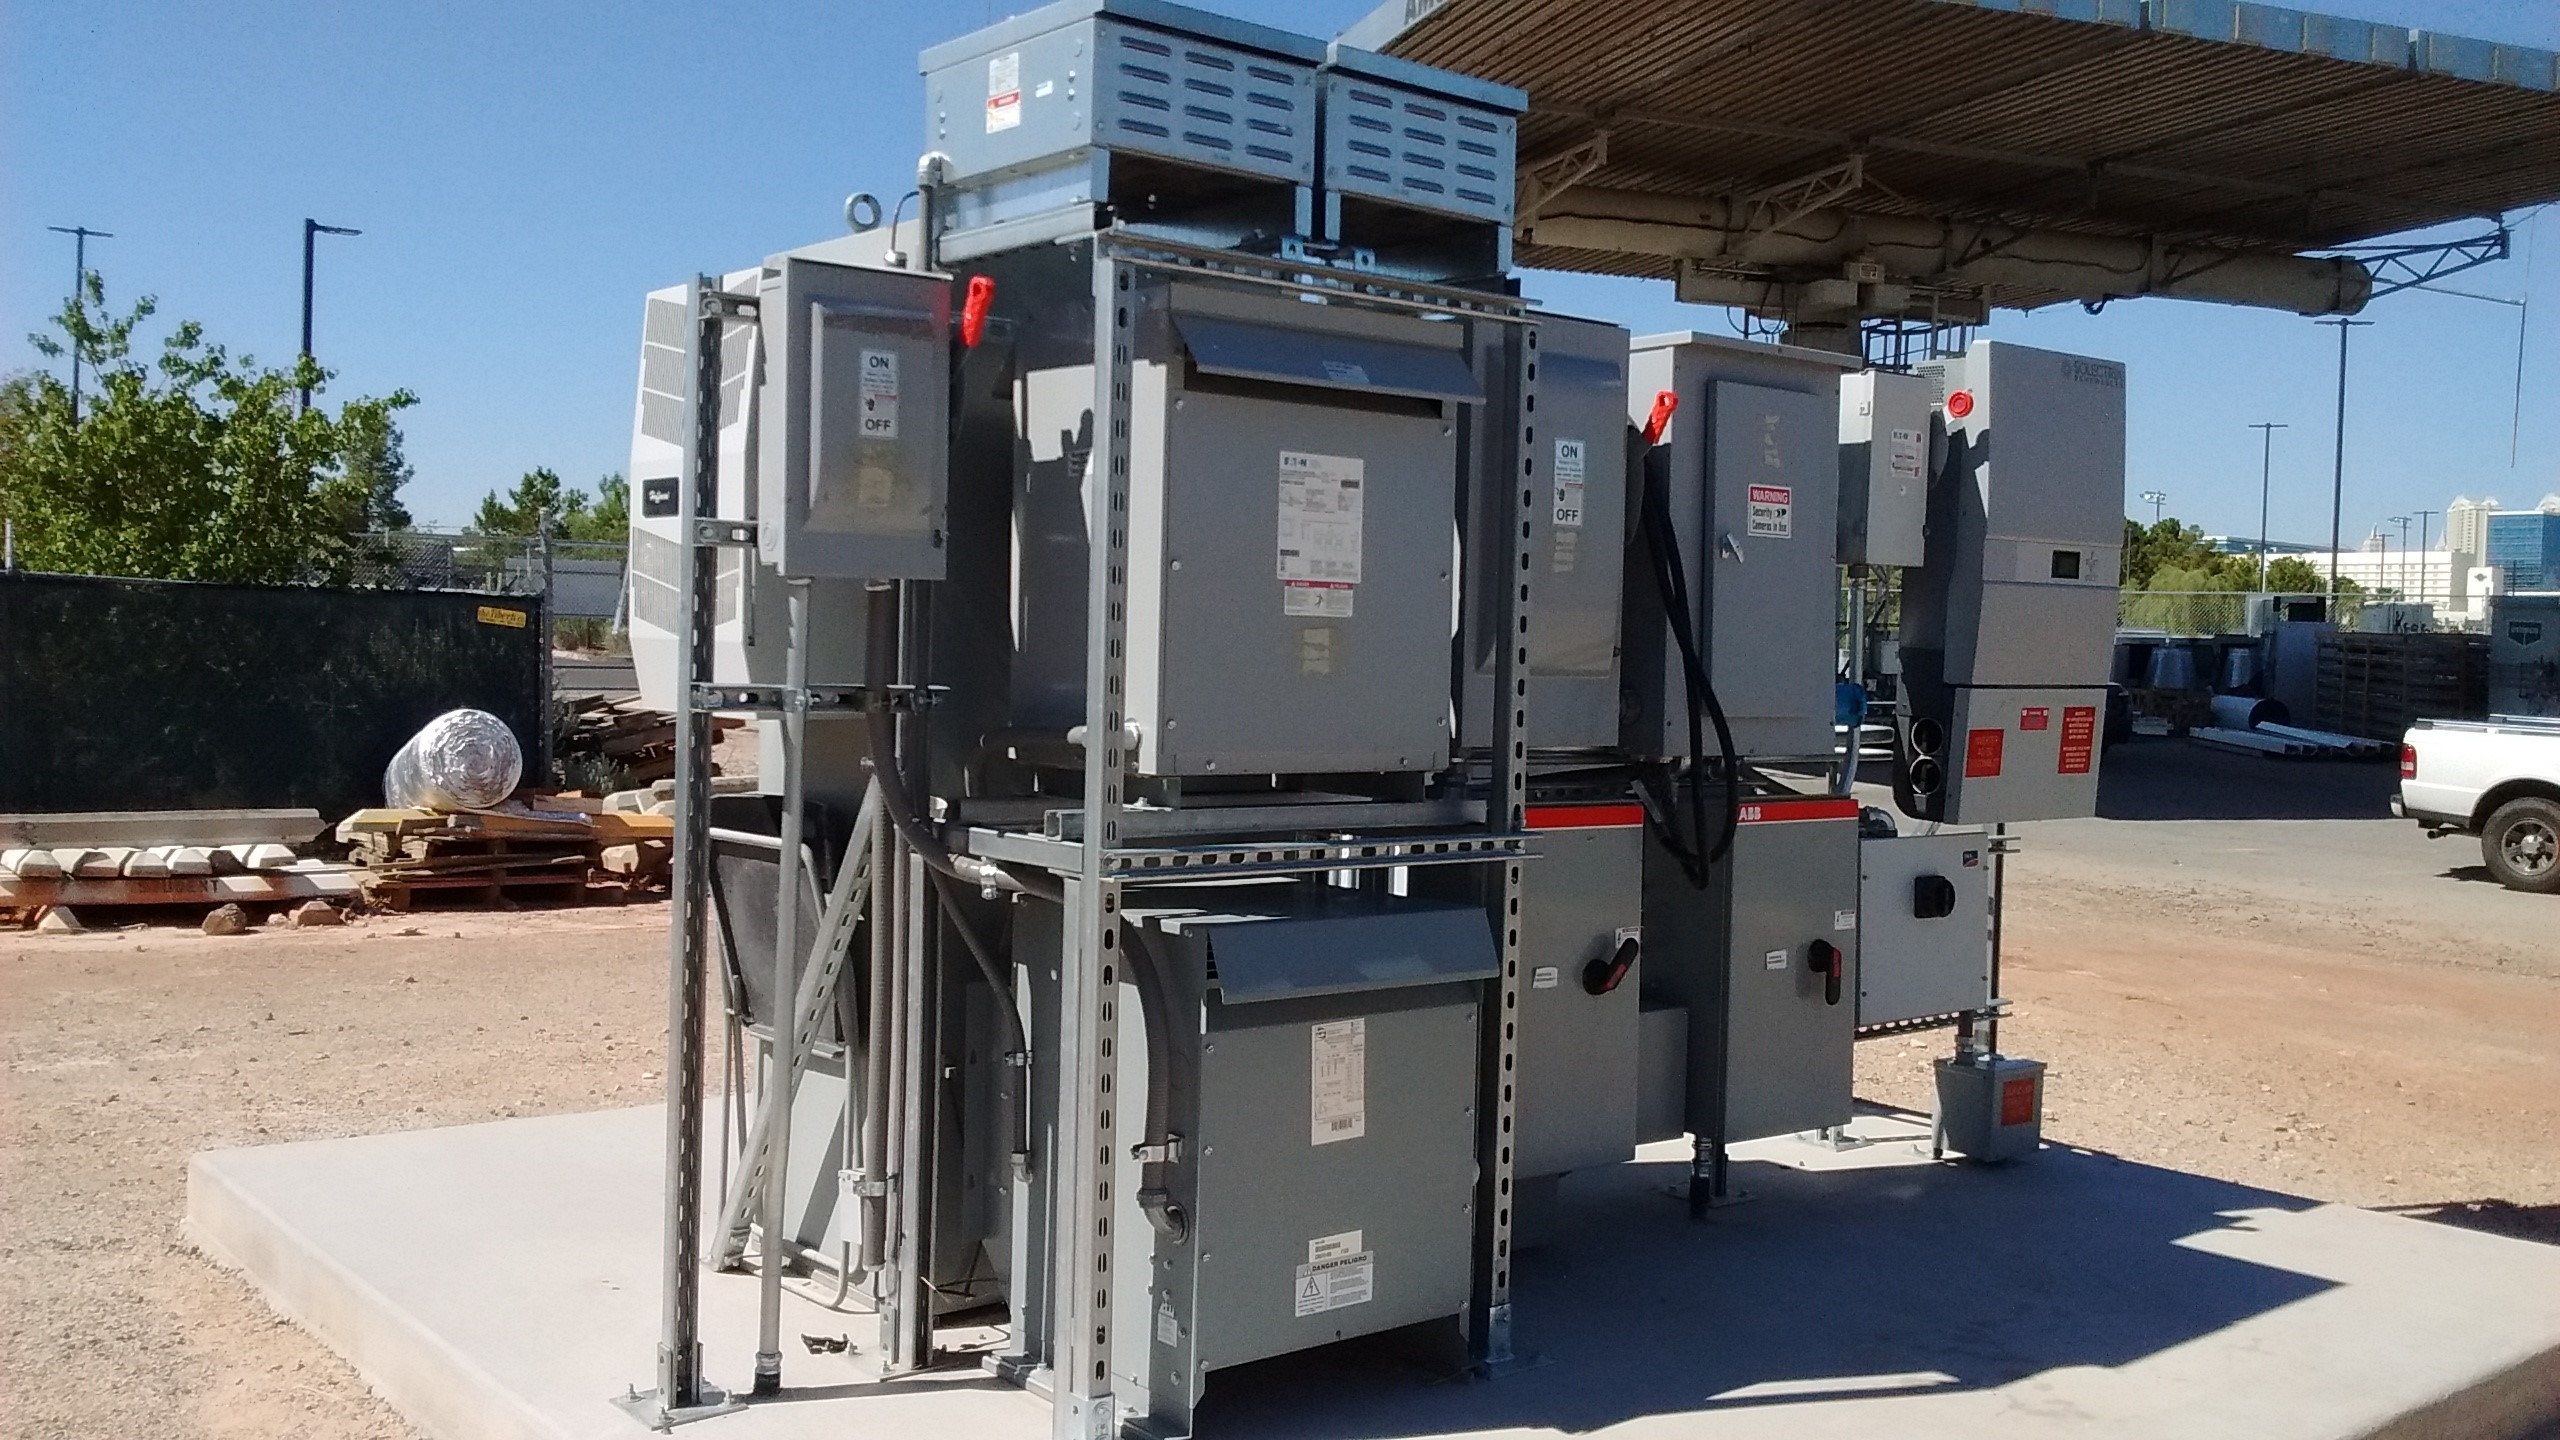 UNLV Microgrid front view